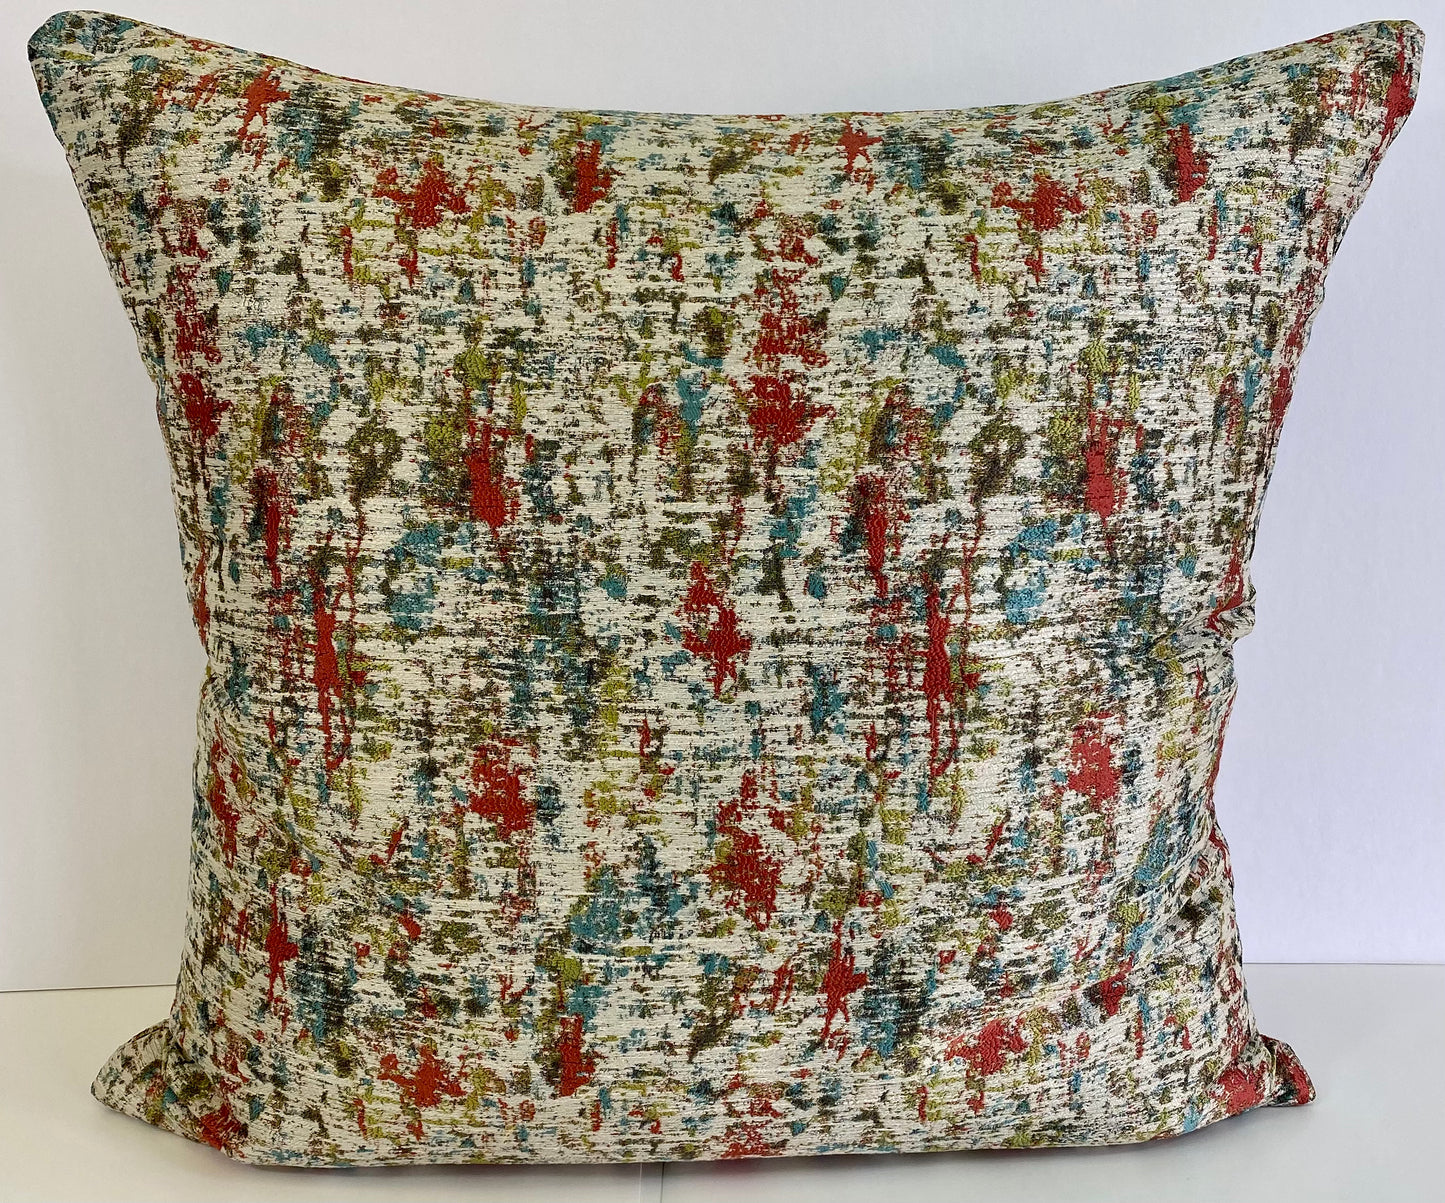 Luxury Pillow - 24" x 24" - Pollock Dream; A beautiful splattered paint style with reds, blue, and green with a cream background